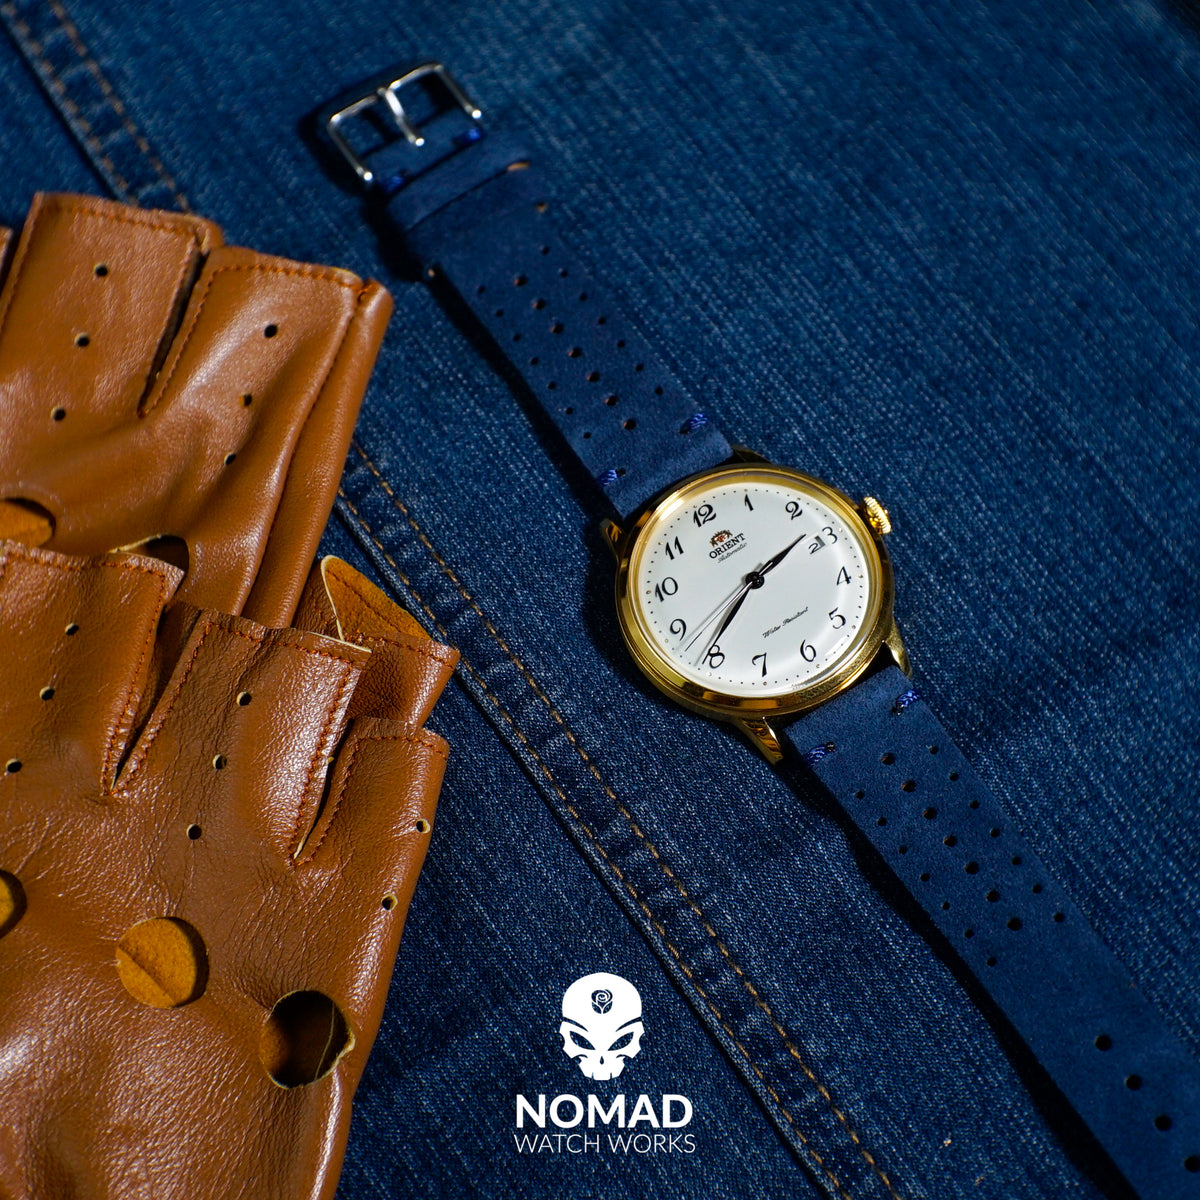 Premium Rally Suede Leather Watch Strap in Navy (20mm) - Nomad Watch Works Malaysia